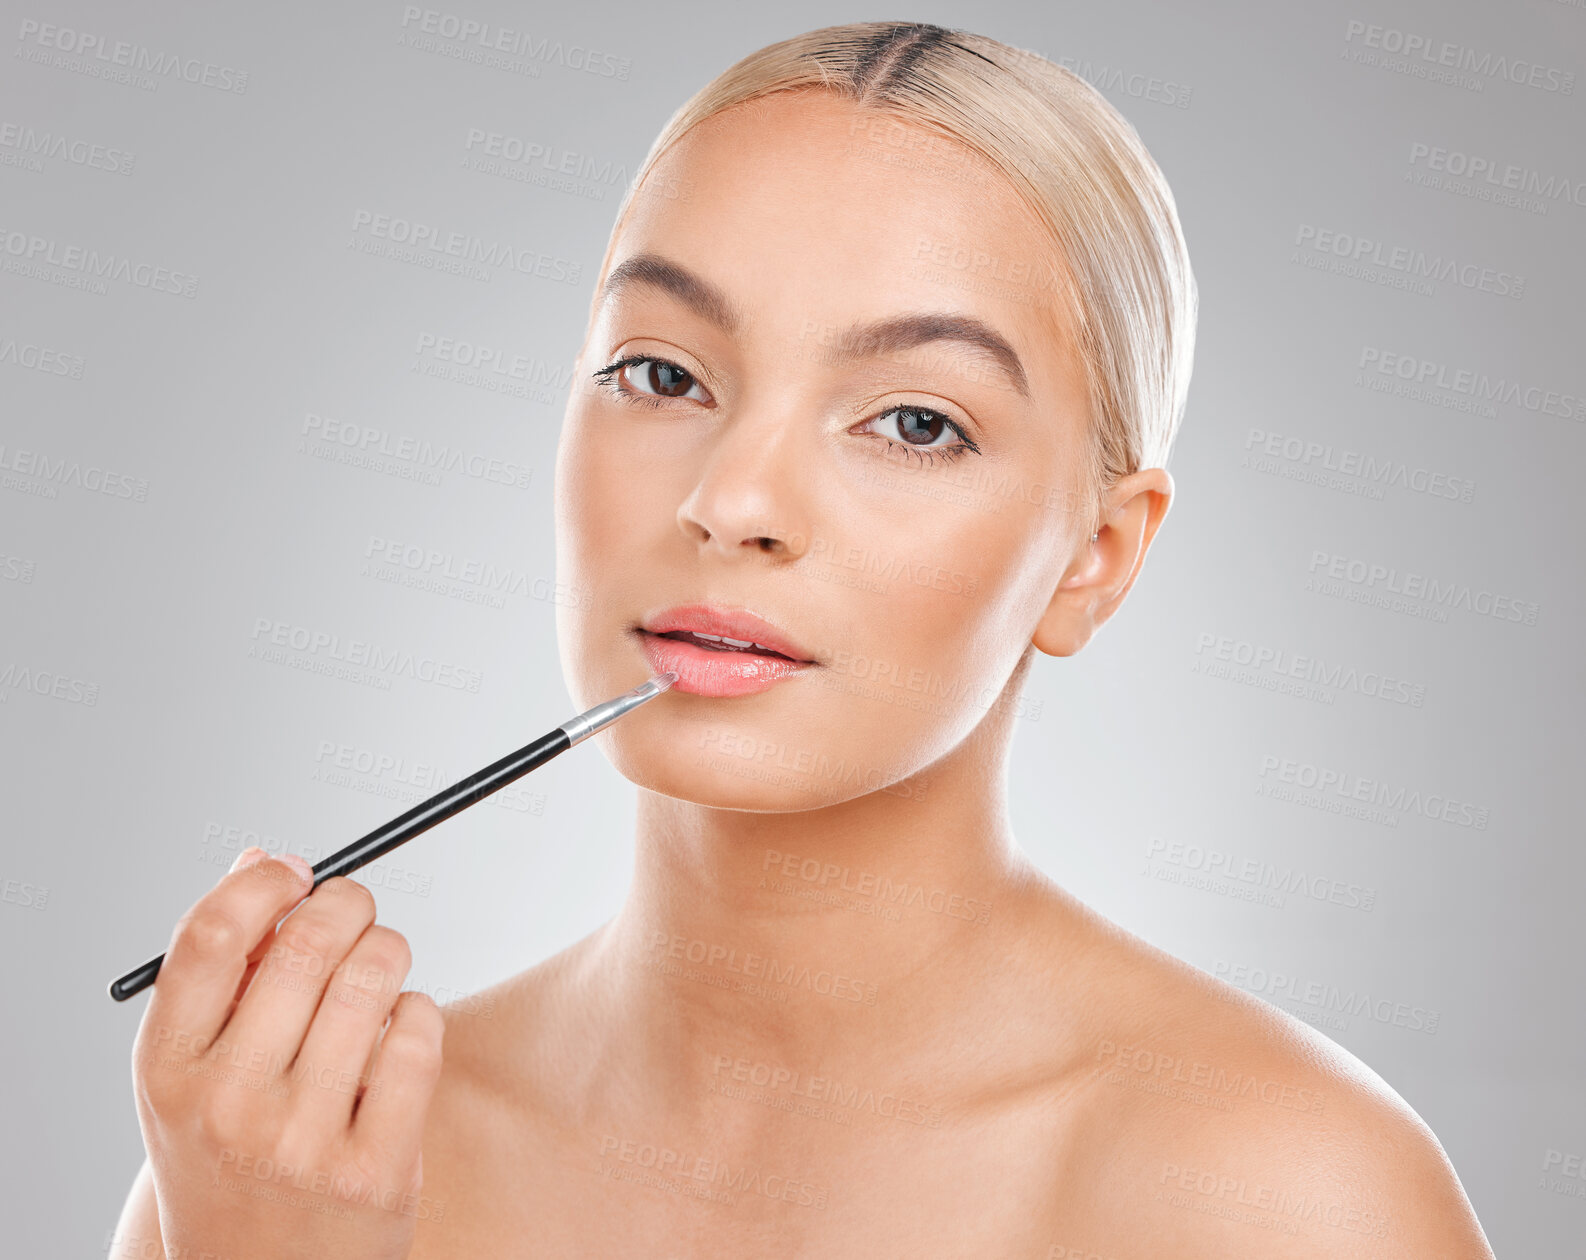 Buy stock photo Shot of a beautiful young woman applying lipgloss to her lips against a grey background